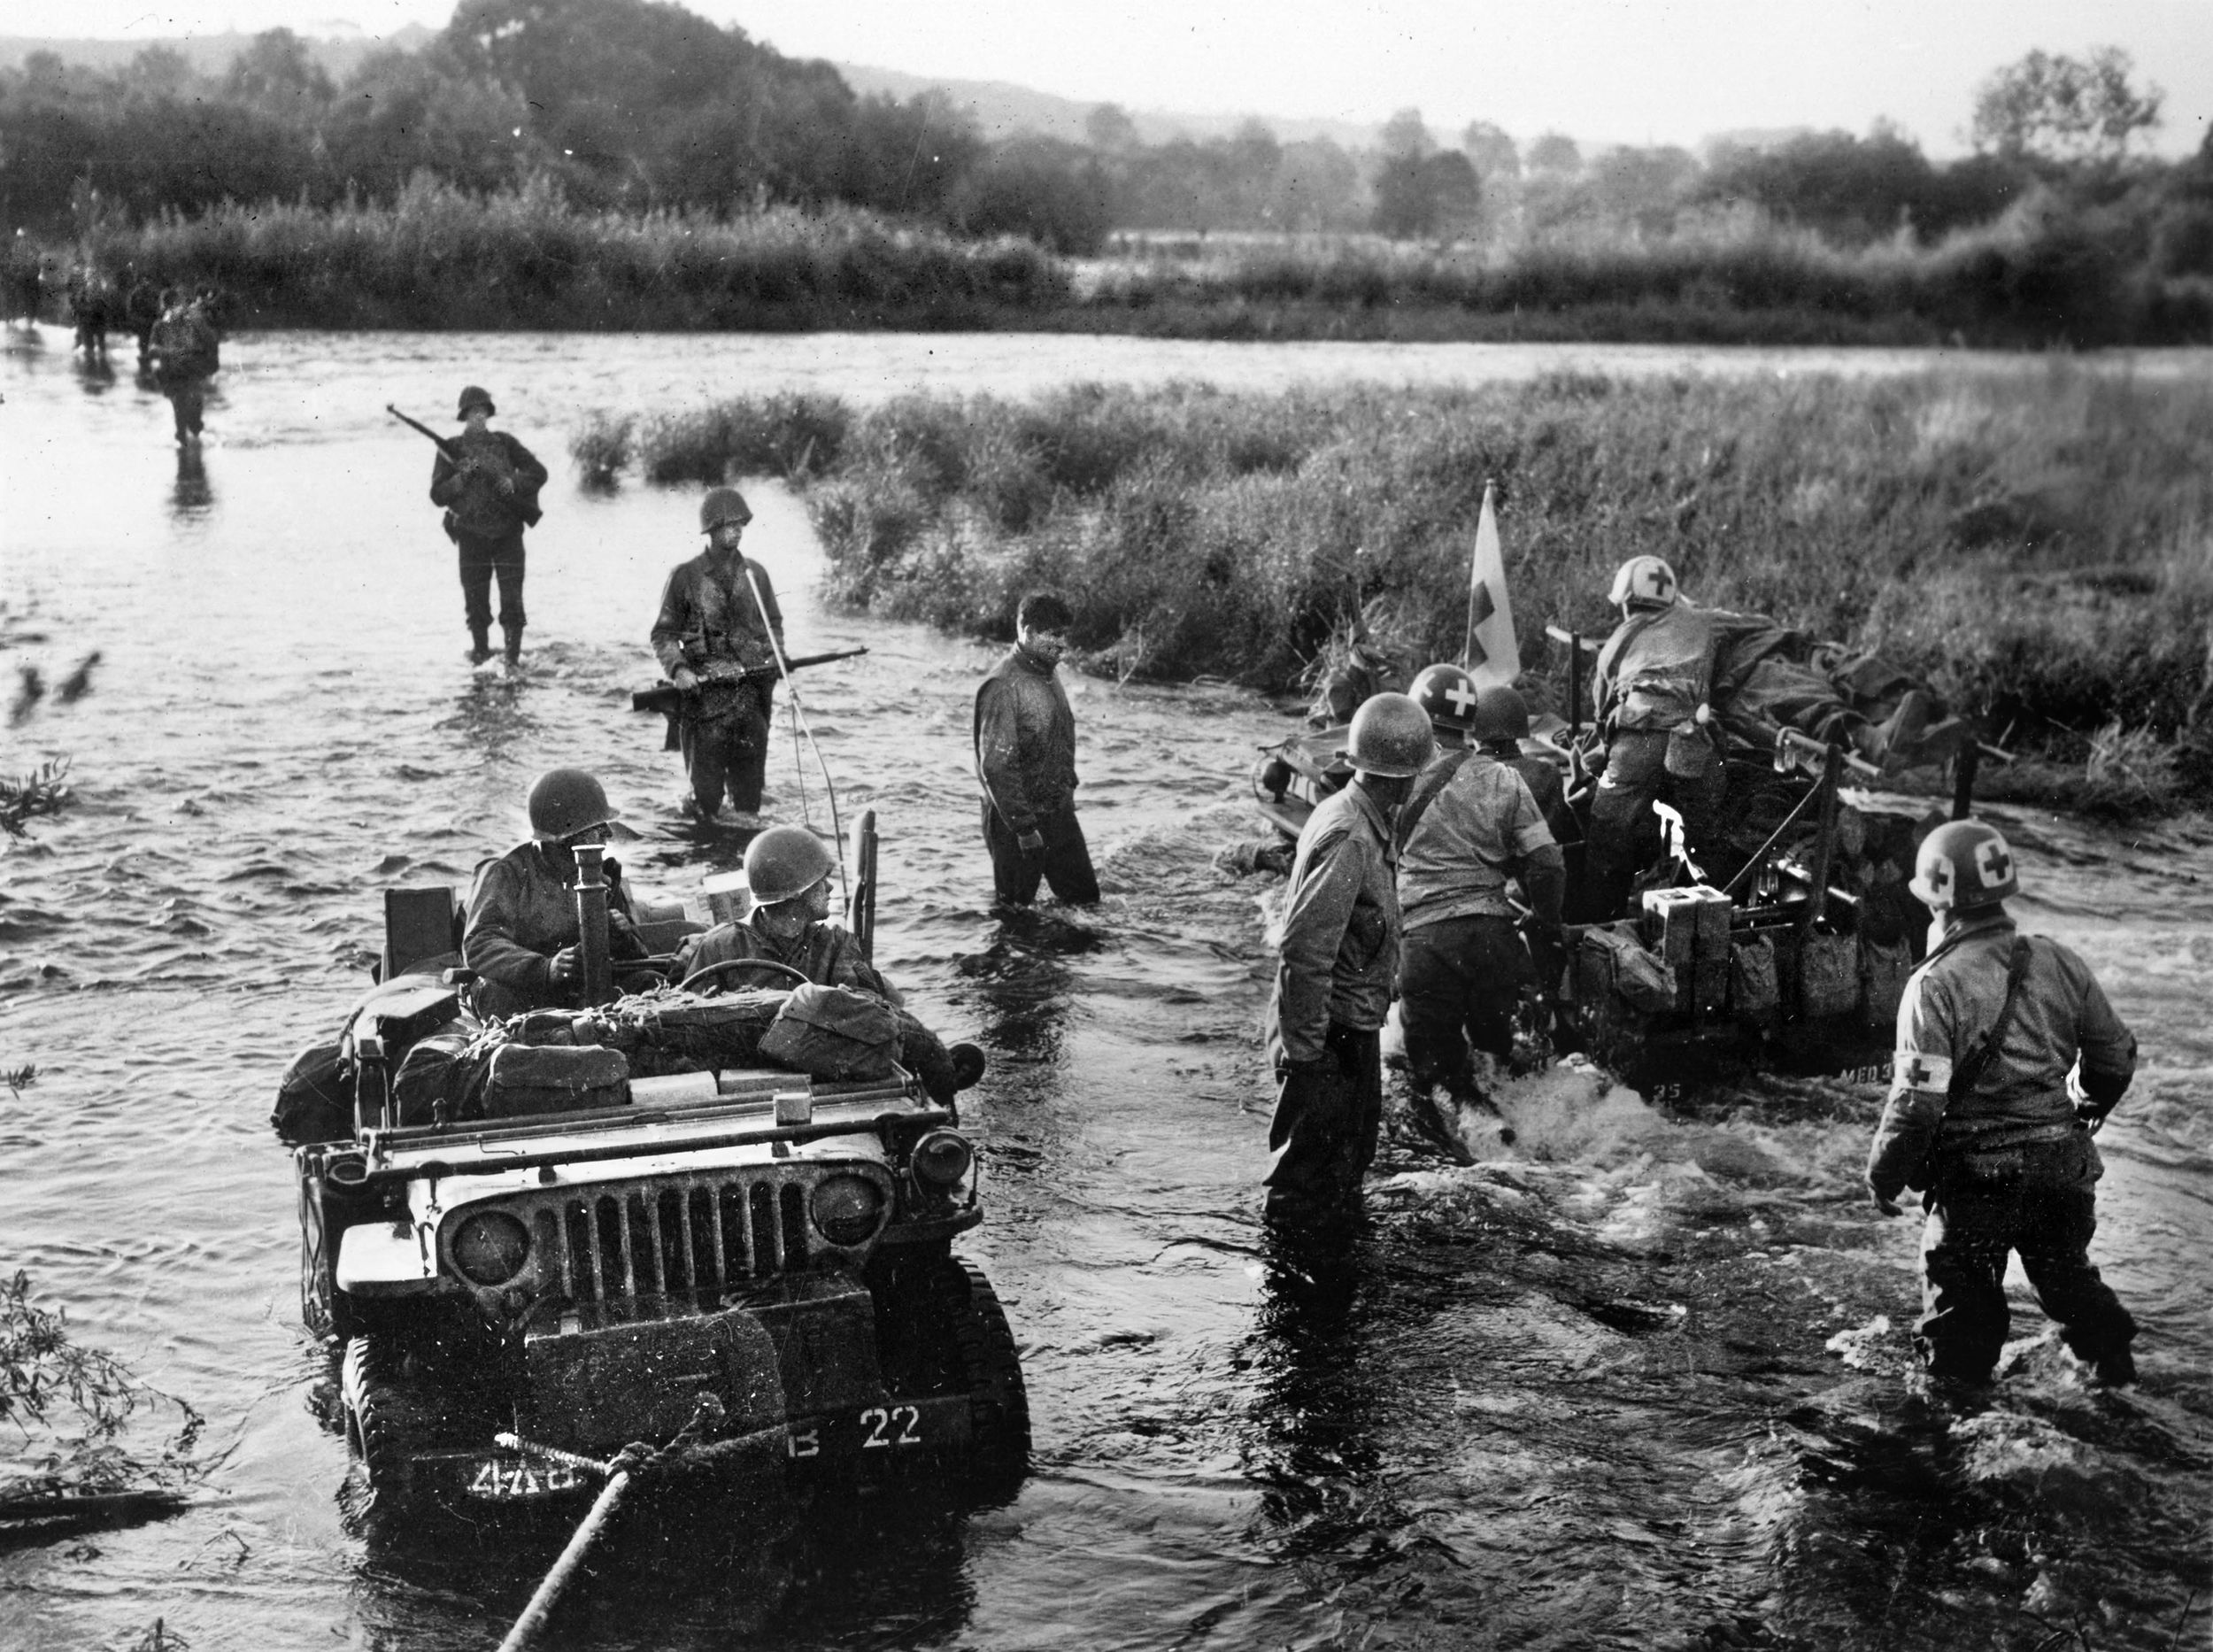 American soldiers wade and drive a Jeep across the Moselle River in September 1944, pausing to watch another vehicle move in the opposite direction, probably carrying wounded. Note the Red Cross identification and the presence of medics.